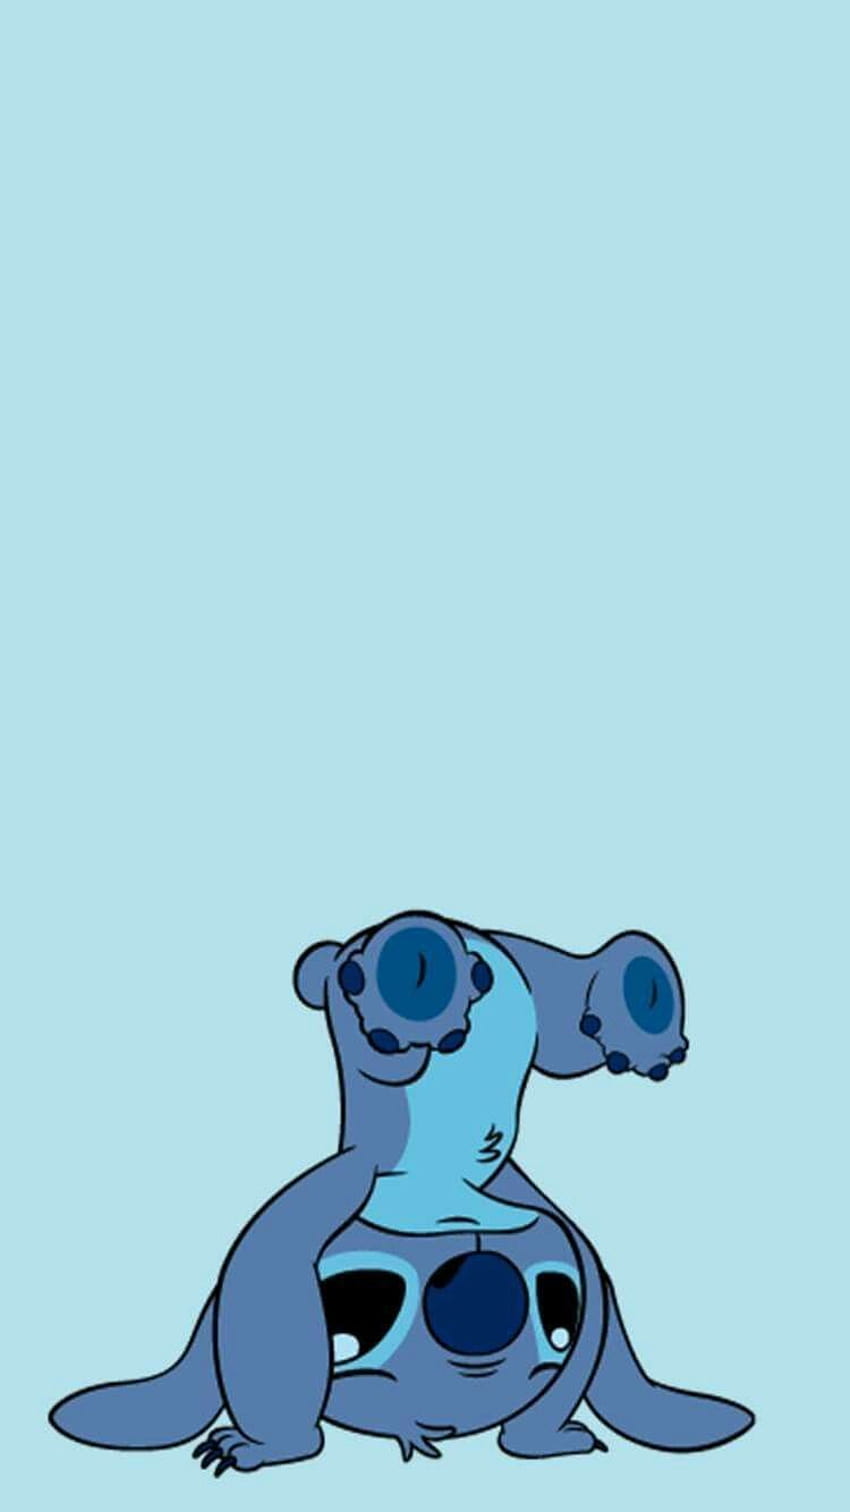 Background Stitch Aesthetic Wallpaper Discover more Character Disney  Fictional Koala Lil  Cute disney wallpaper Cartoon wallpaper iphone  Cute blue wallpaper